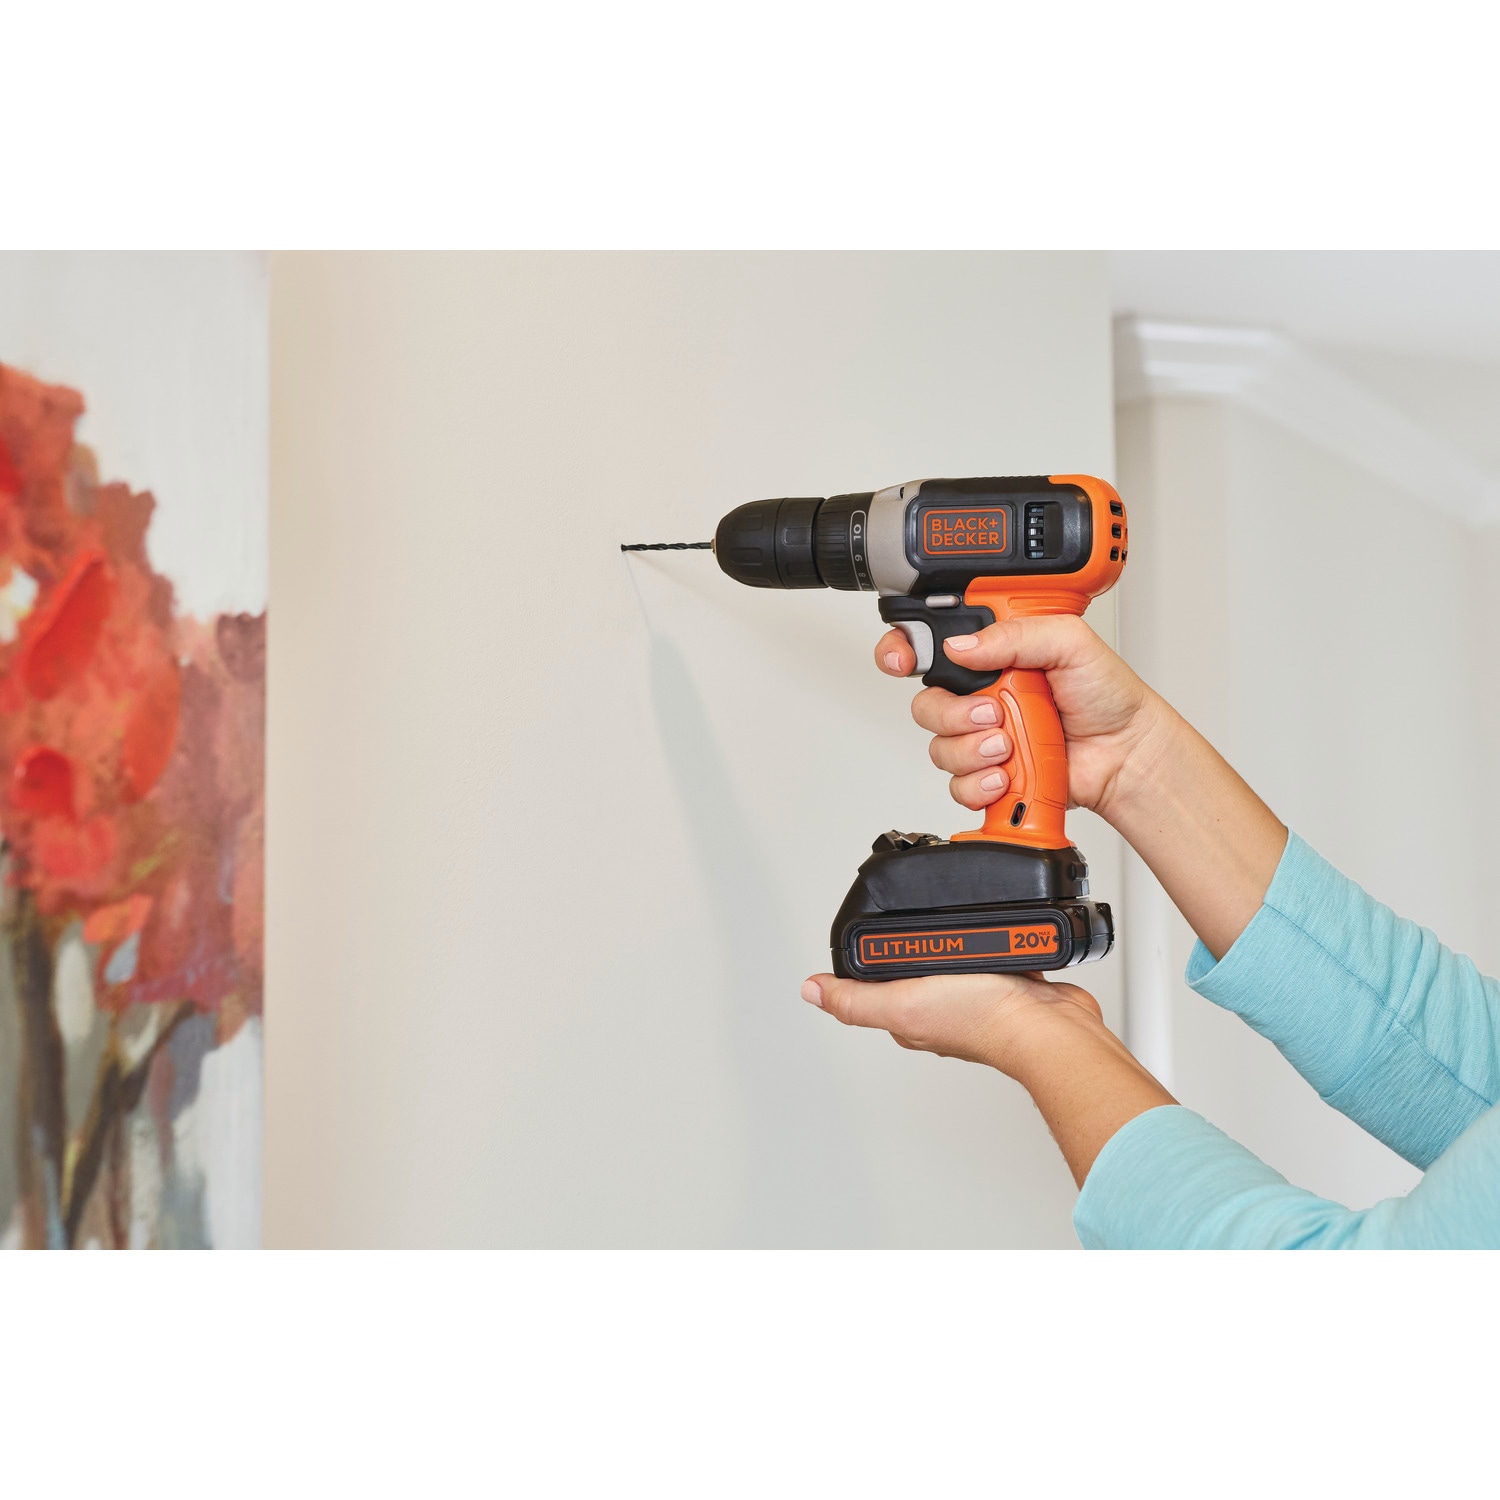 beyond by BLACK+DECKER Home Tool Kit with 20V MAX Drill/Driver, 83-Piece  (BDPK70284C1AEV) : Tools & Home Improvement 